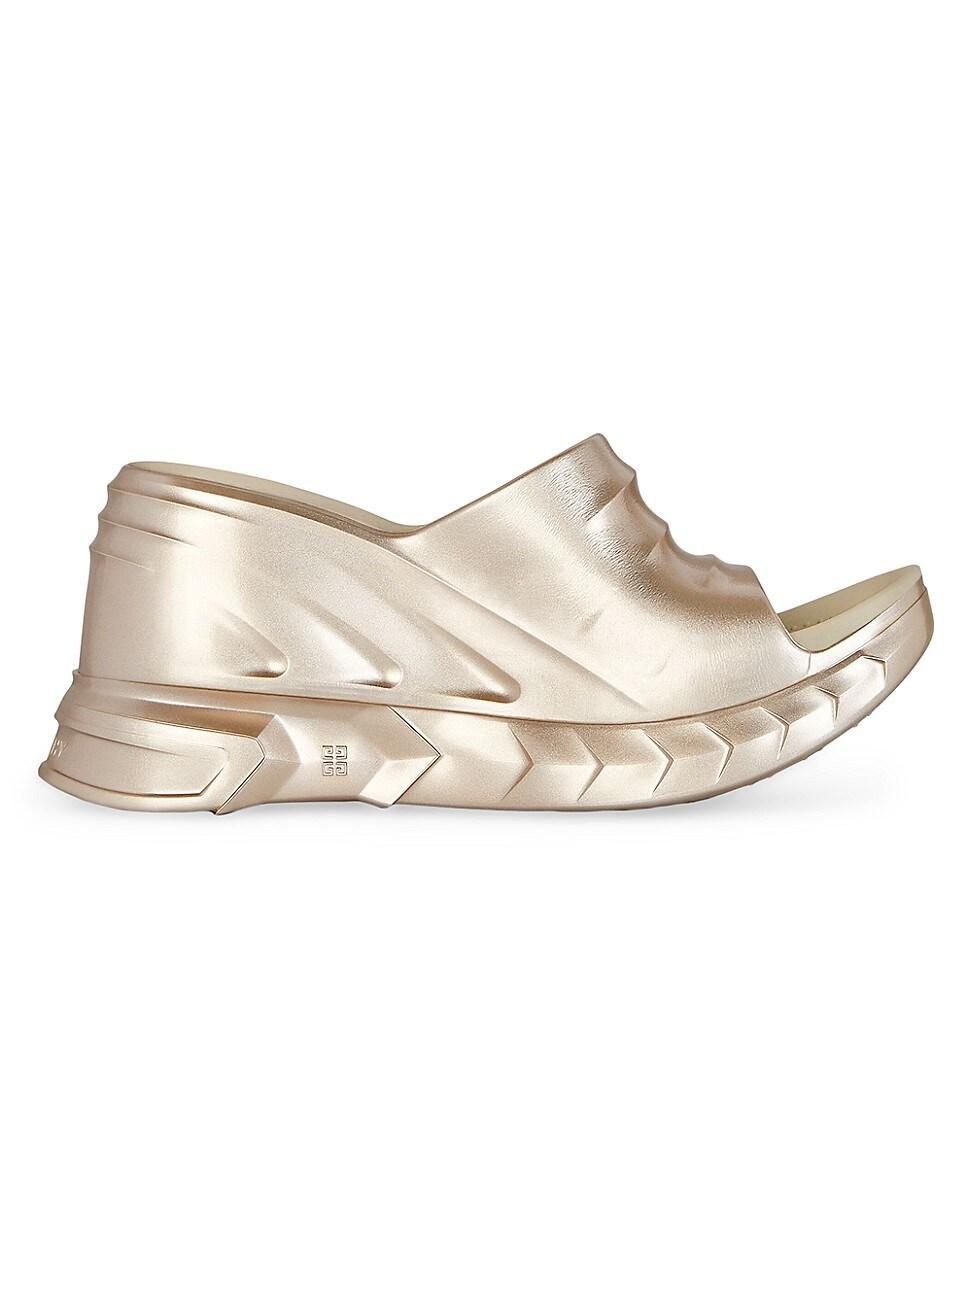 Womens Marshmallow Wedge Sandals In Laminated Rubber Product Image